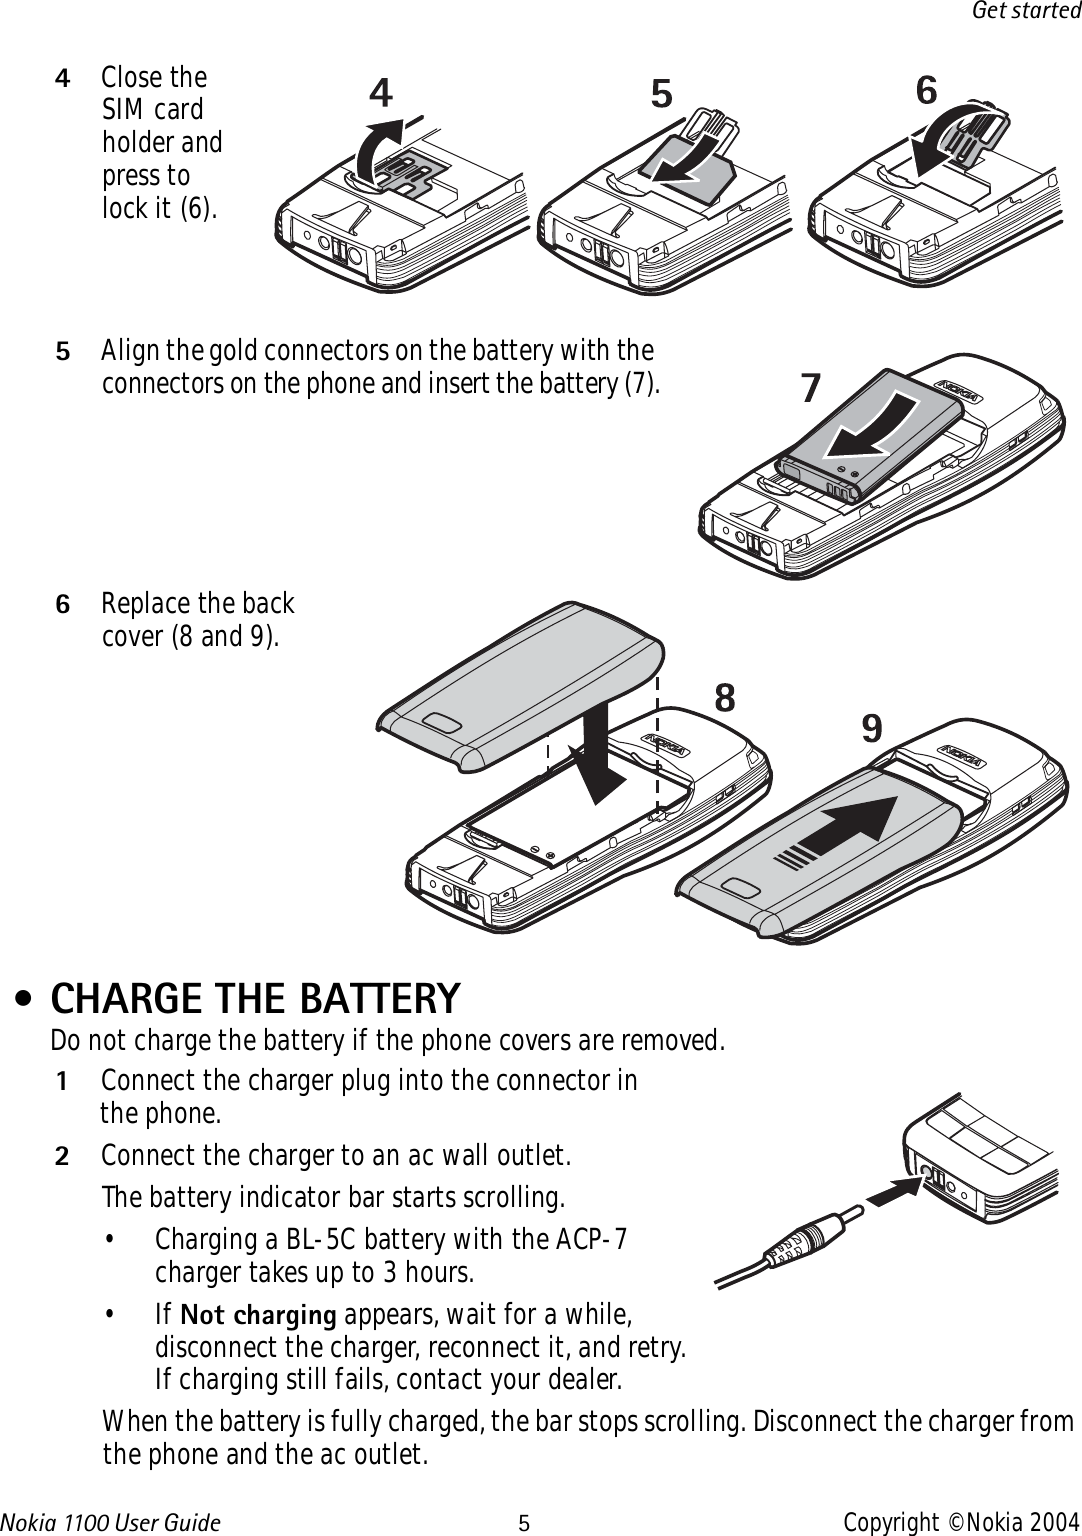 Nokia 110 0  User Guide 5Copyright © Nokia 2004Get started4Close the SIM card holder and press to lock it (6).5Align the gold connectors on the battery with the connectors on the phone and insert the battery (7).6Replace the back cover (8 and 9). • CHARGE THE BATTERYDo not charge the battery if the phone covers are removed. 1Connect the charger plug into the connector in the phone.2Connect the charger to an ac wall outlet. The battery indicator bar starts scrolling.• Charging a BL-5C battery with the ACP-7 charger takes up to 3 hours.•If Not charging appears, wait for a while, disconnect the charger, reconnect it, and retry. If charging still fails, contact your dealer.When the battery is fully charged, the bar stops scrolling. Disconnect the charger from the phone and the ac outlet.